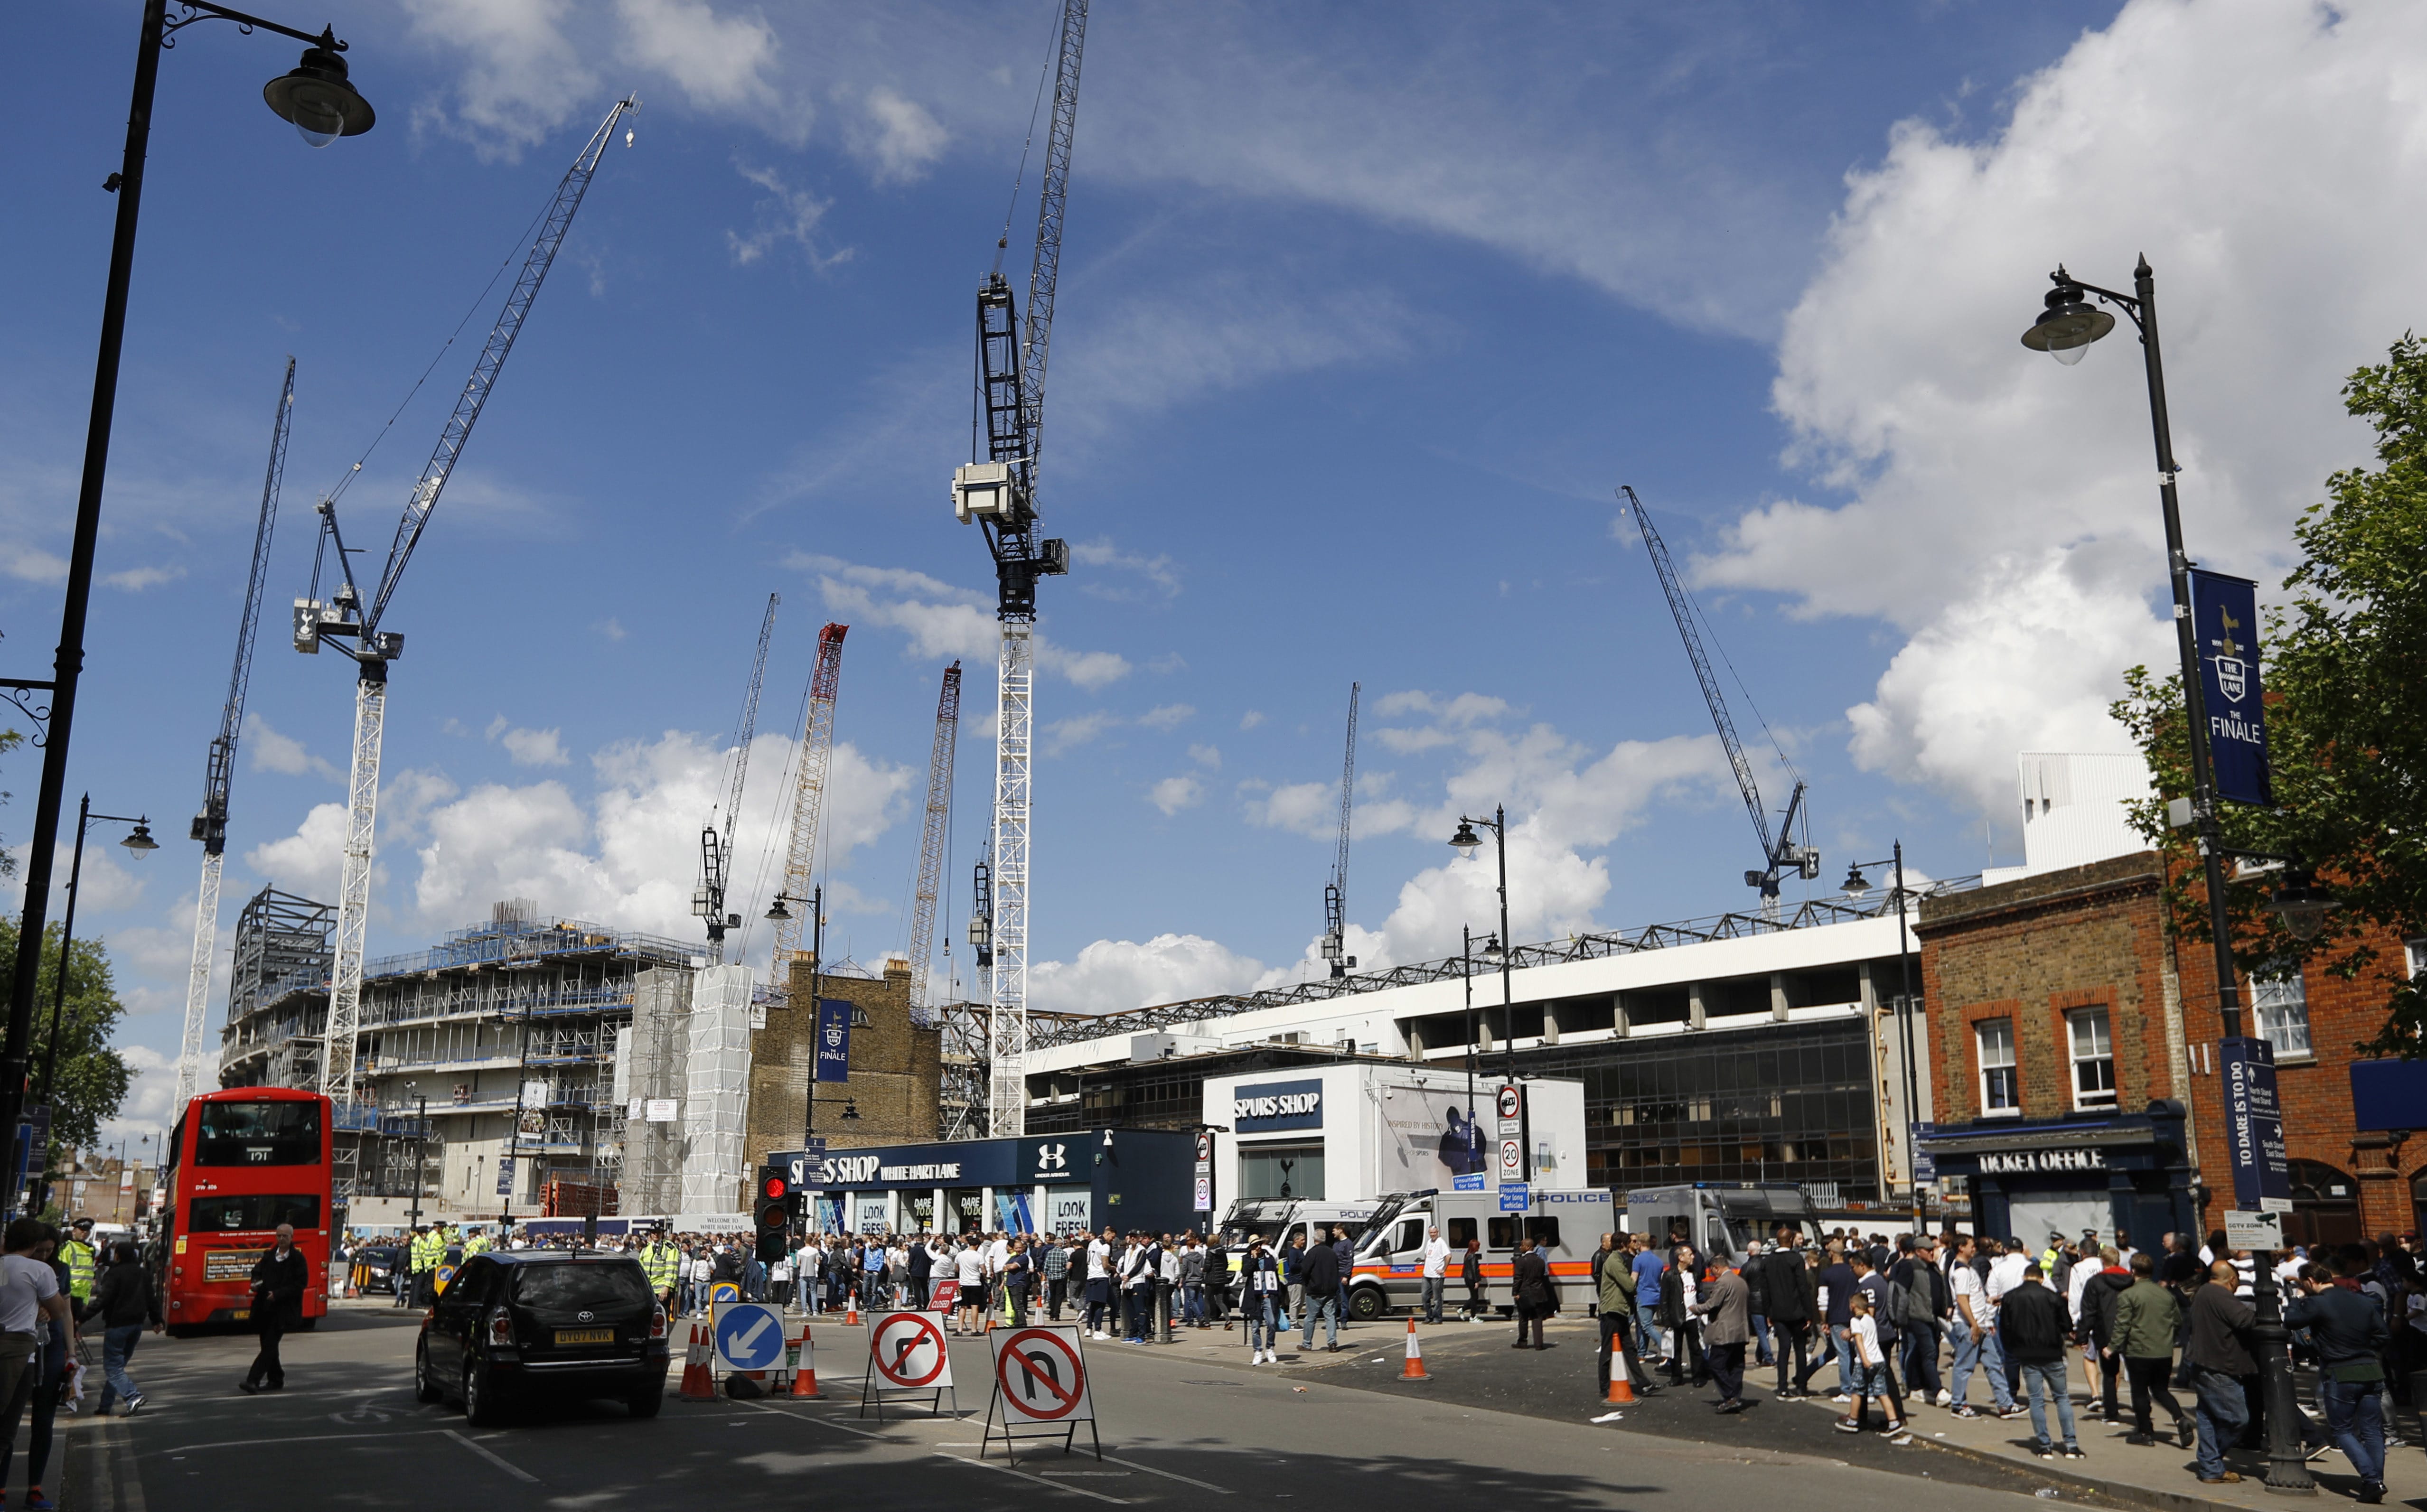 Soccer fans arrive for a match between Tottenham Hotspur and Manchester United as cranes being used for construction work are seen at White Hart Lane stadium in London. The Oakland Raiders will host the Seattle Seahawks in the first NFL game at the new London stadium of English Premier League club Tottenham. The game will be played in Week 6 of the NFL season on Oct. 14.